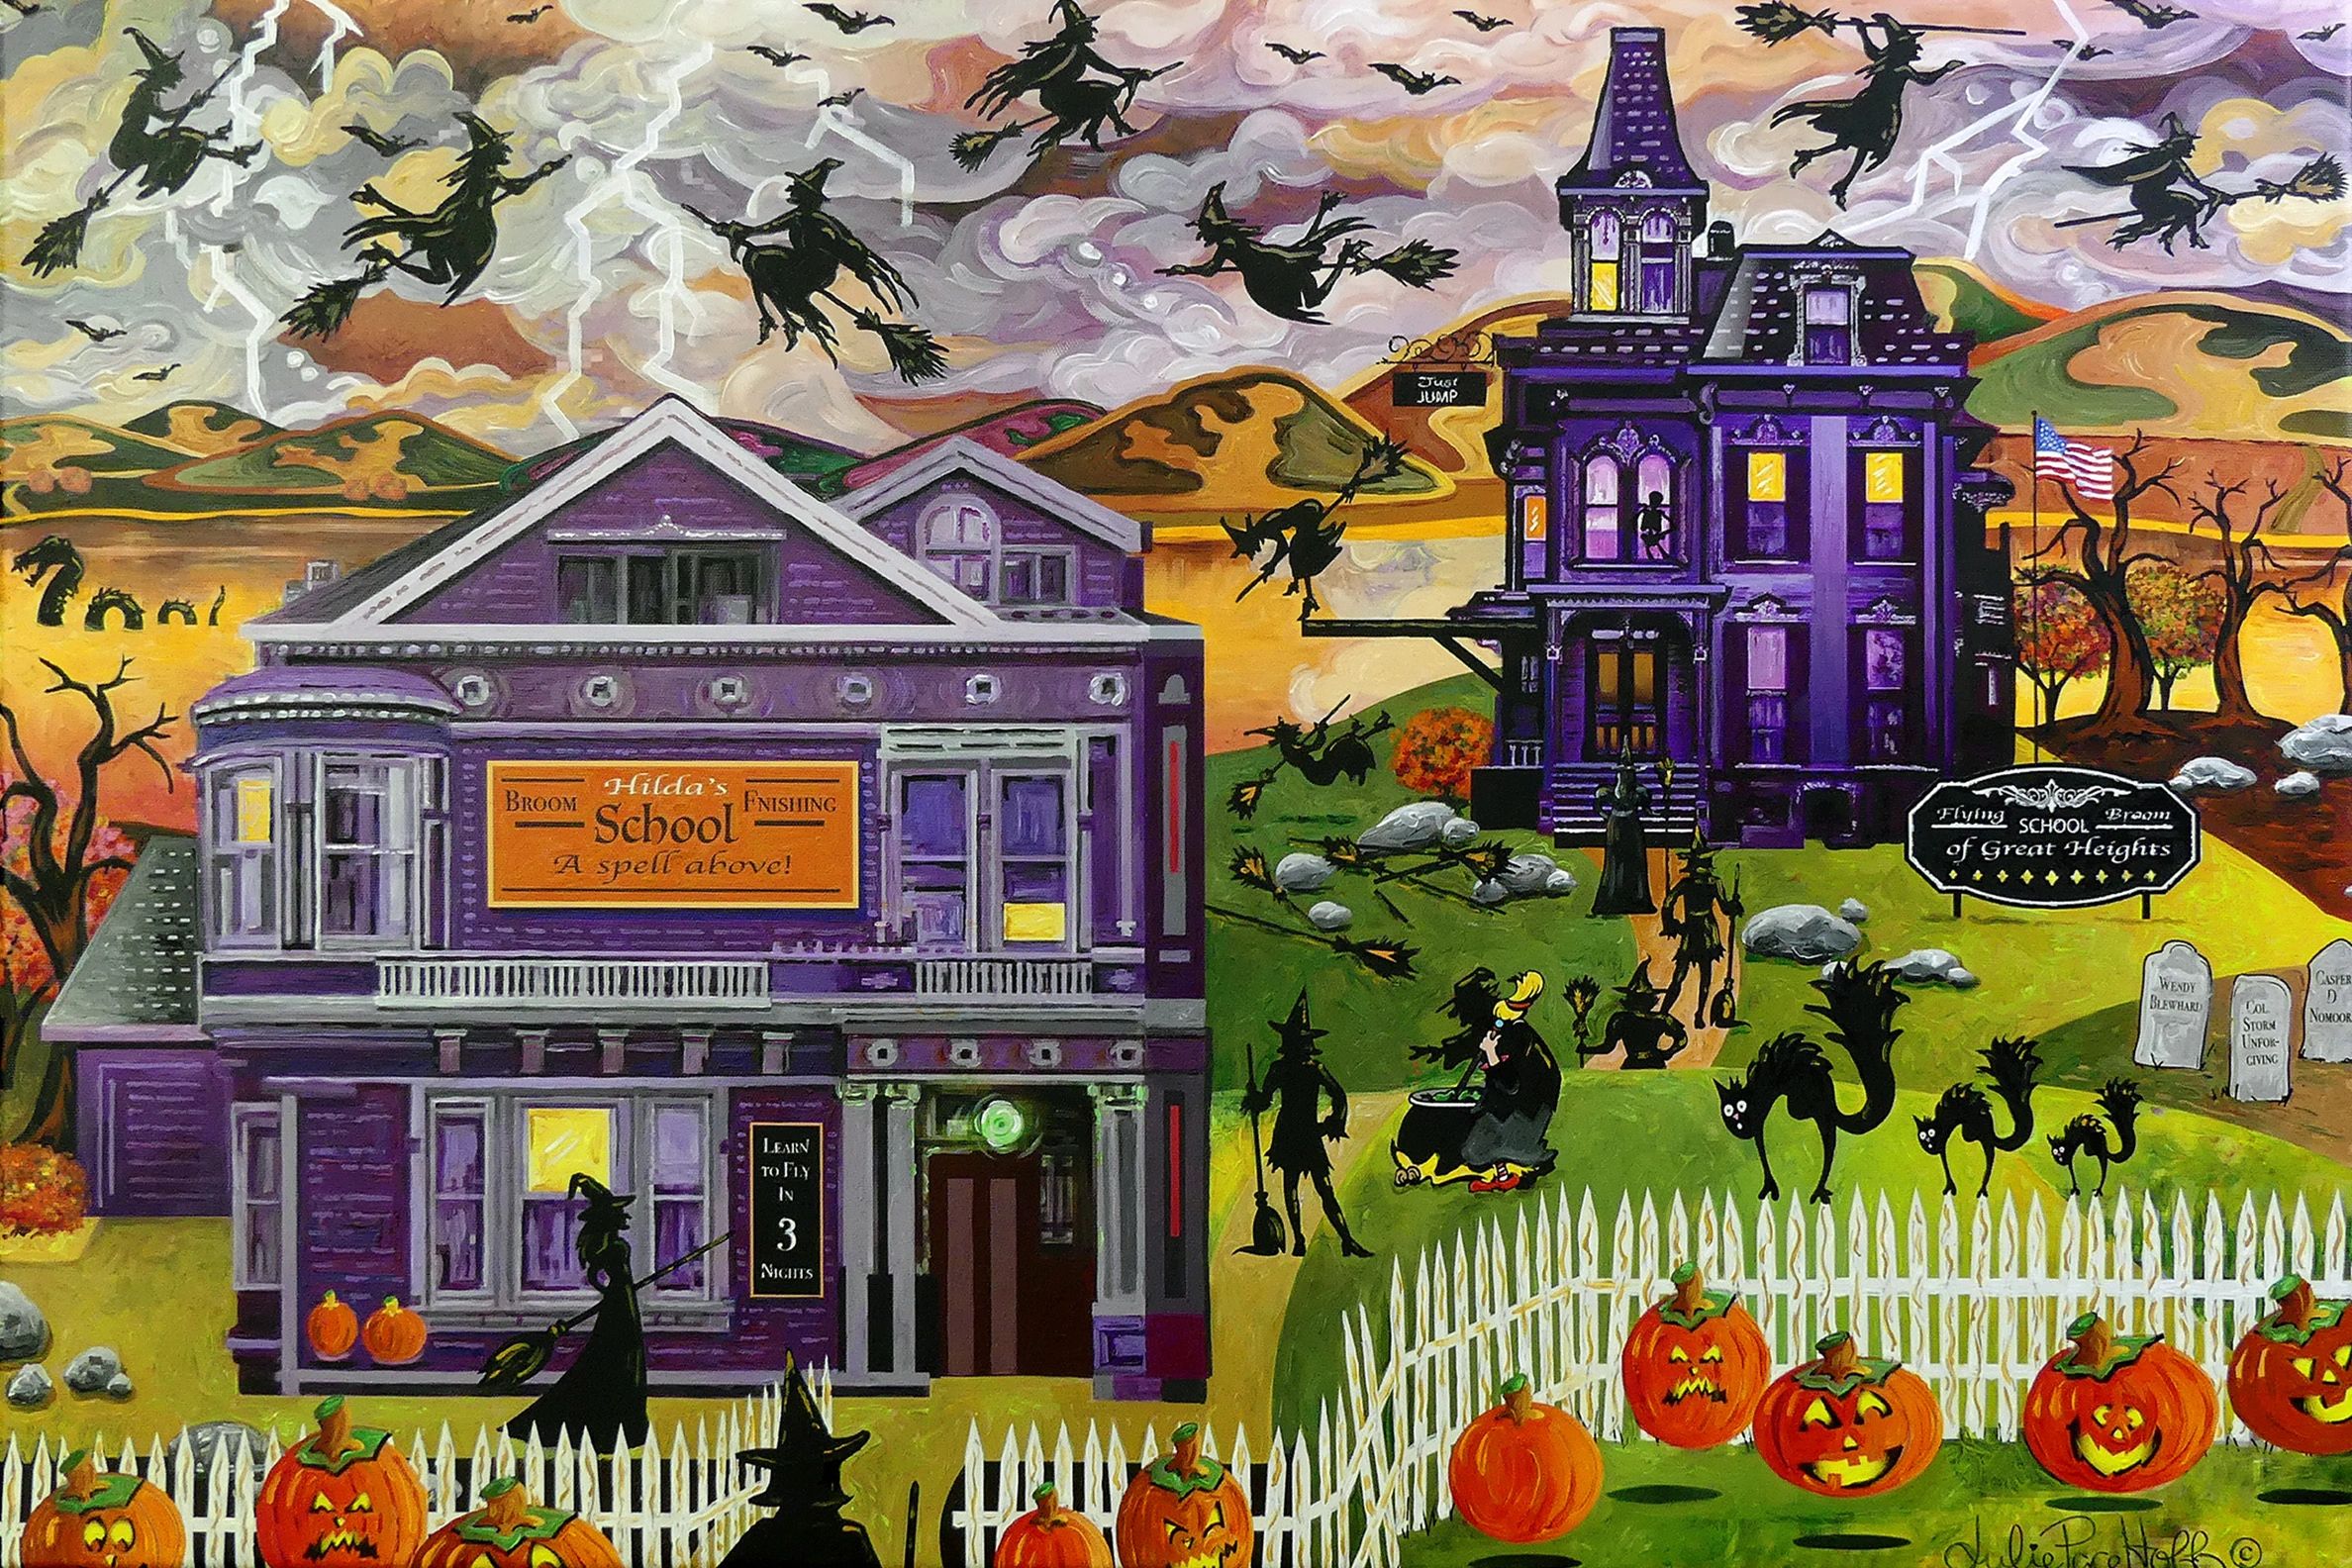 Silly Halloween scene of a witch's flight school with witches flying sideways, backwards, falling, a